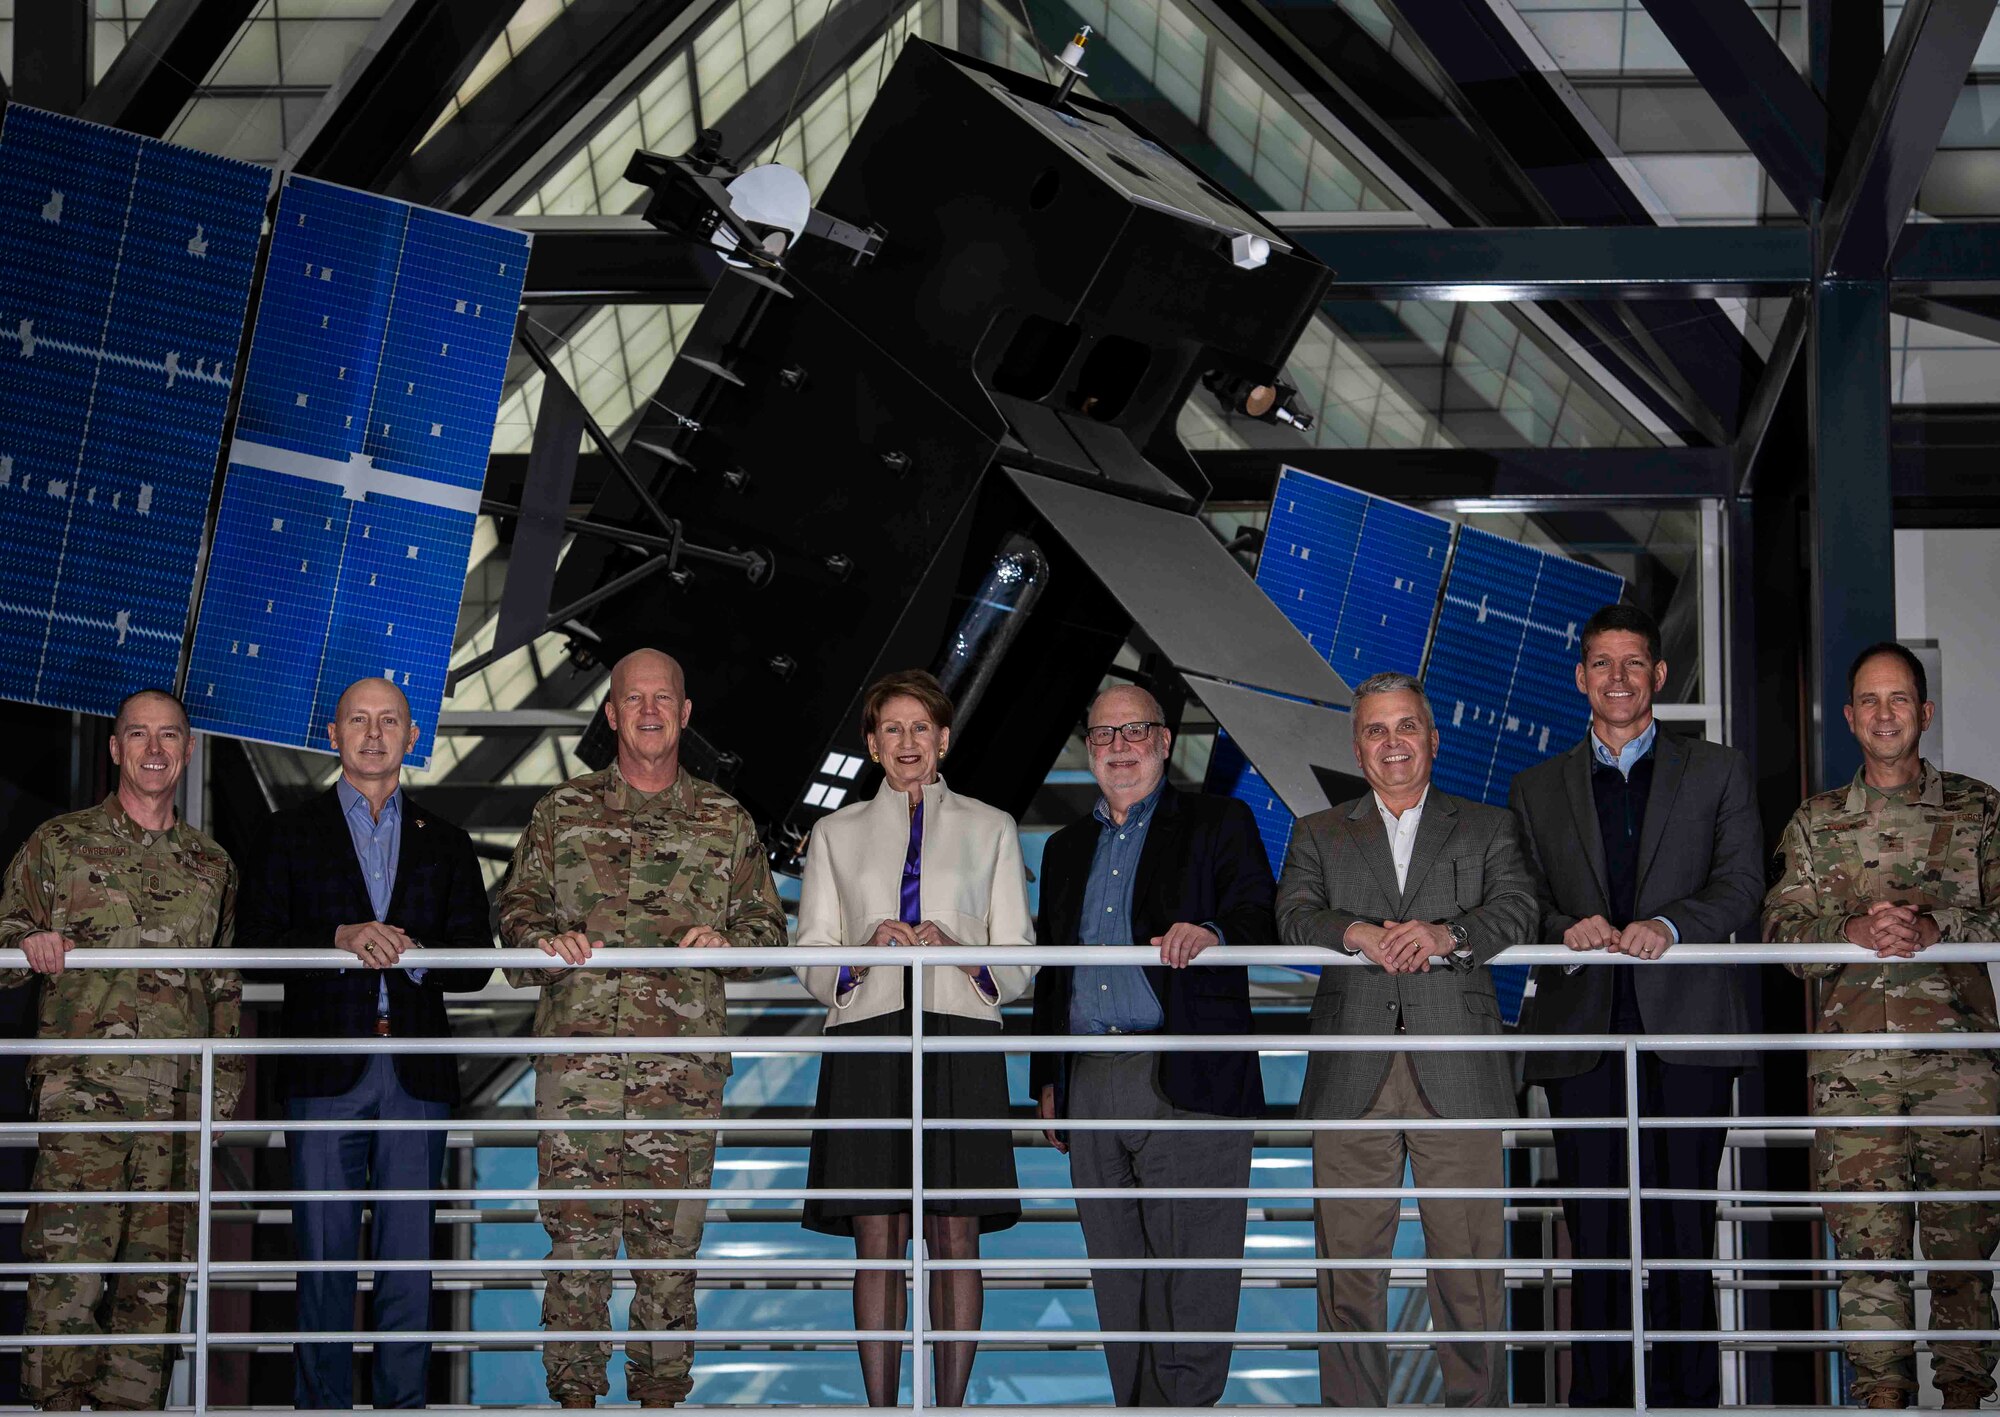 Barbara Barrett, Secretary of the Air Force, met with Gen. Jay Raymond, Commander U.S. Space Command, completing her first official trip to learn about military space operations at Peterson AFB, Nov. 1, 2019. USSPACECOM and AFSPC leaders provided command mission briefings and conducted roundtable discussions with Barrett and more than a dozen military space leaders, some of whom gave mission and training updates. (U.S. Air Force photo by Dave Grim/Released)